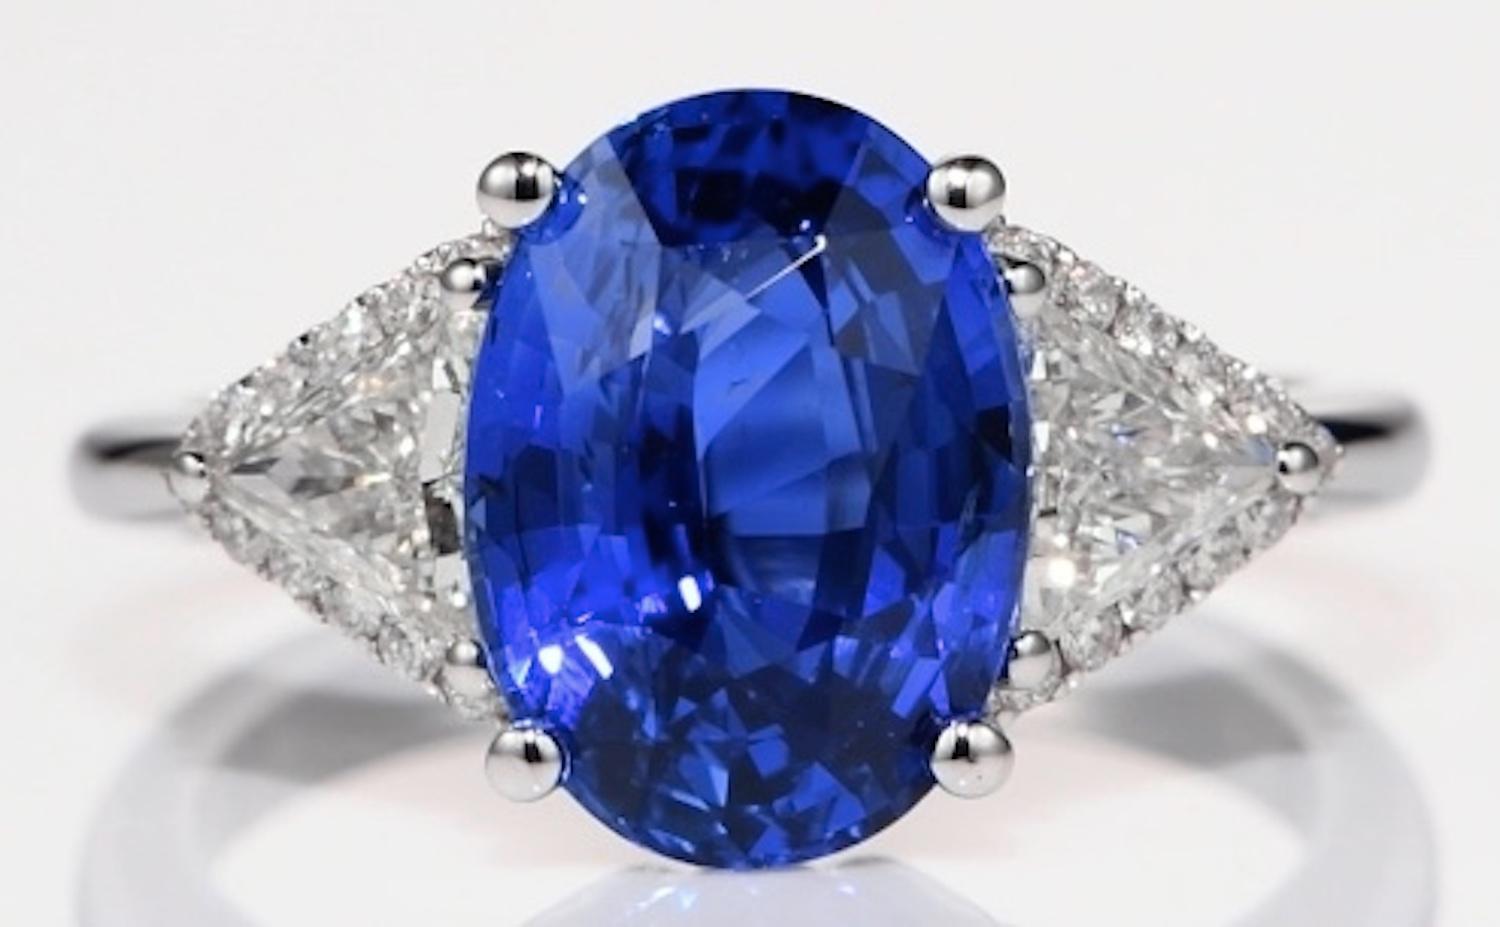 This beautiful, elegant and timeless ring is set with an incredible oval-cut Ceylon blue sapphire, weighing 4.81 carats, flanked on either side by two diamonds weighing 0.61 carats (combined), framed by 22 sparkling diamonds totaling 0.15 carats and